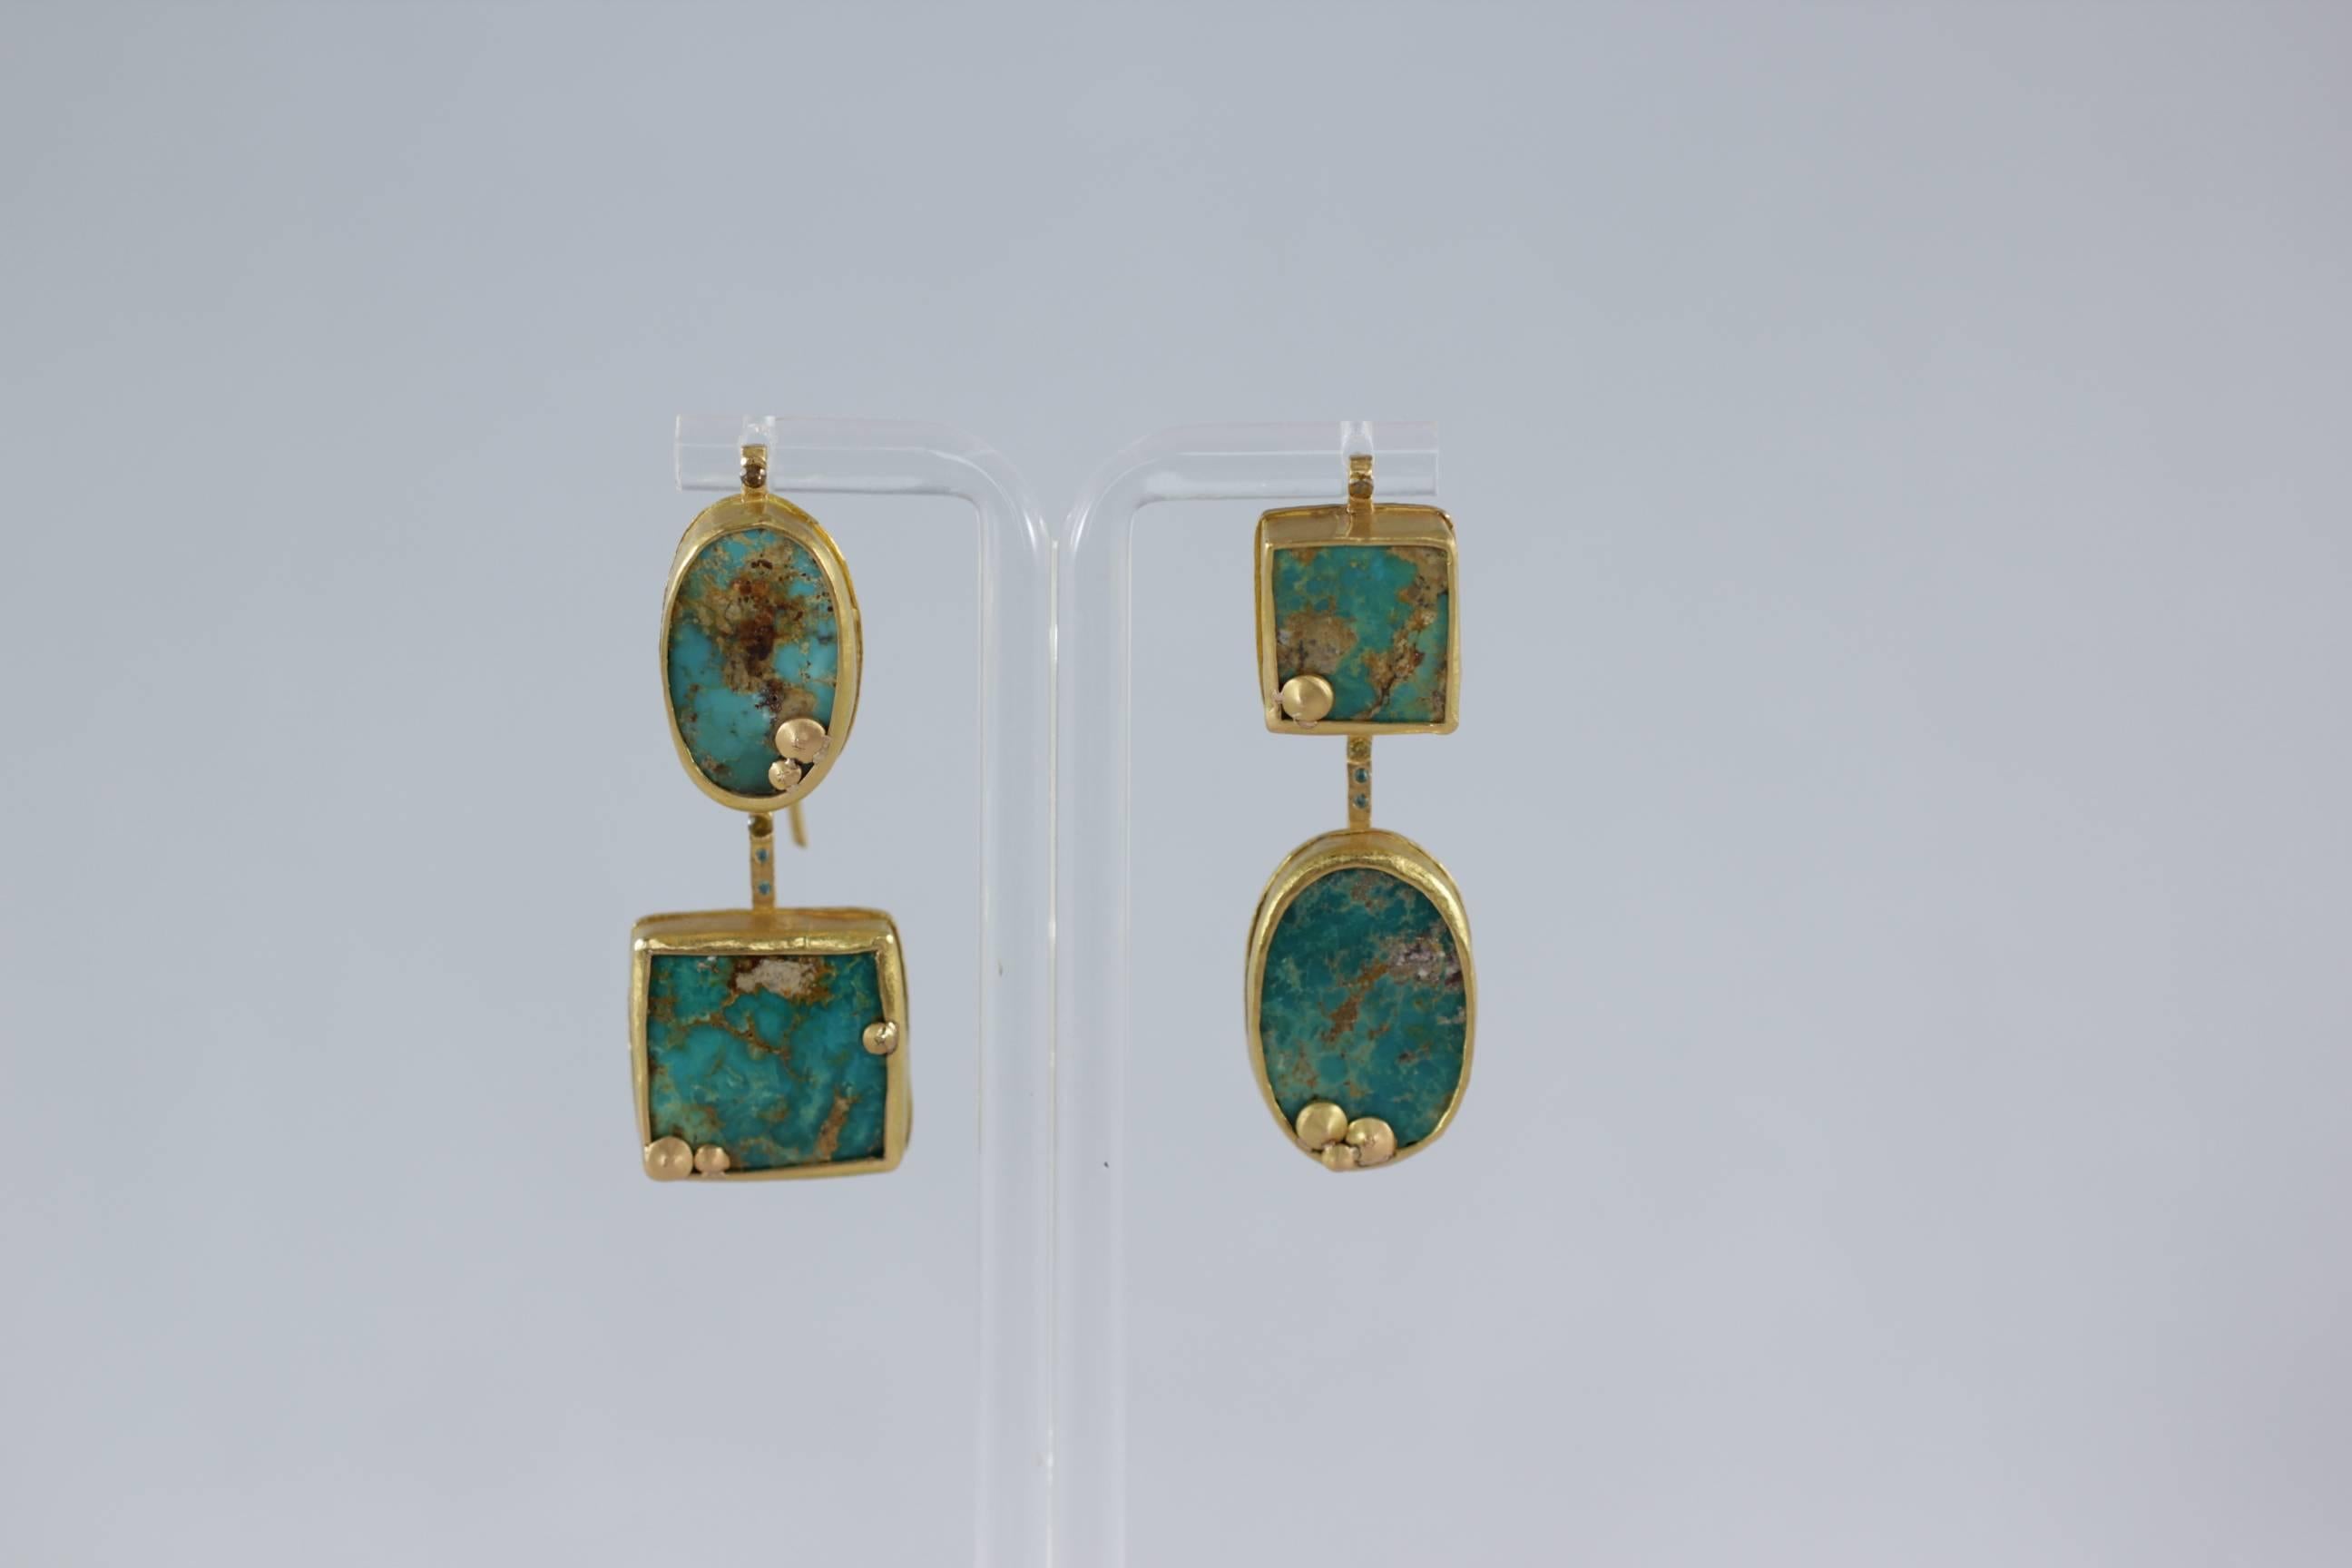 In Stock. Scheherazade Earrings. Elegant and exotic, blue with brown veins Persian Turquoise are bezel set in these minimalist earrings. Flush set brown and blue diamonds add sophistication to the design while keeping it modern.

-21k gold, 18k ear